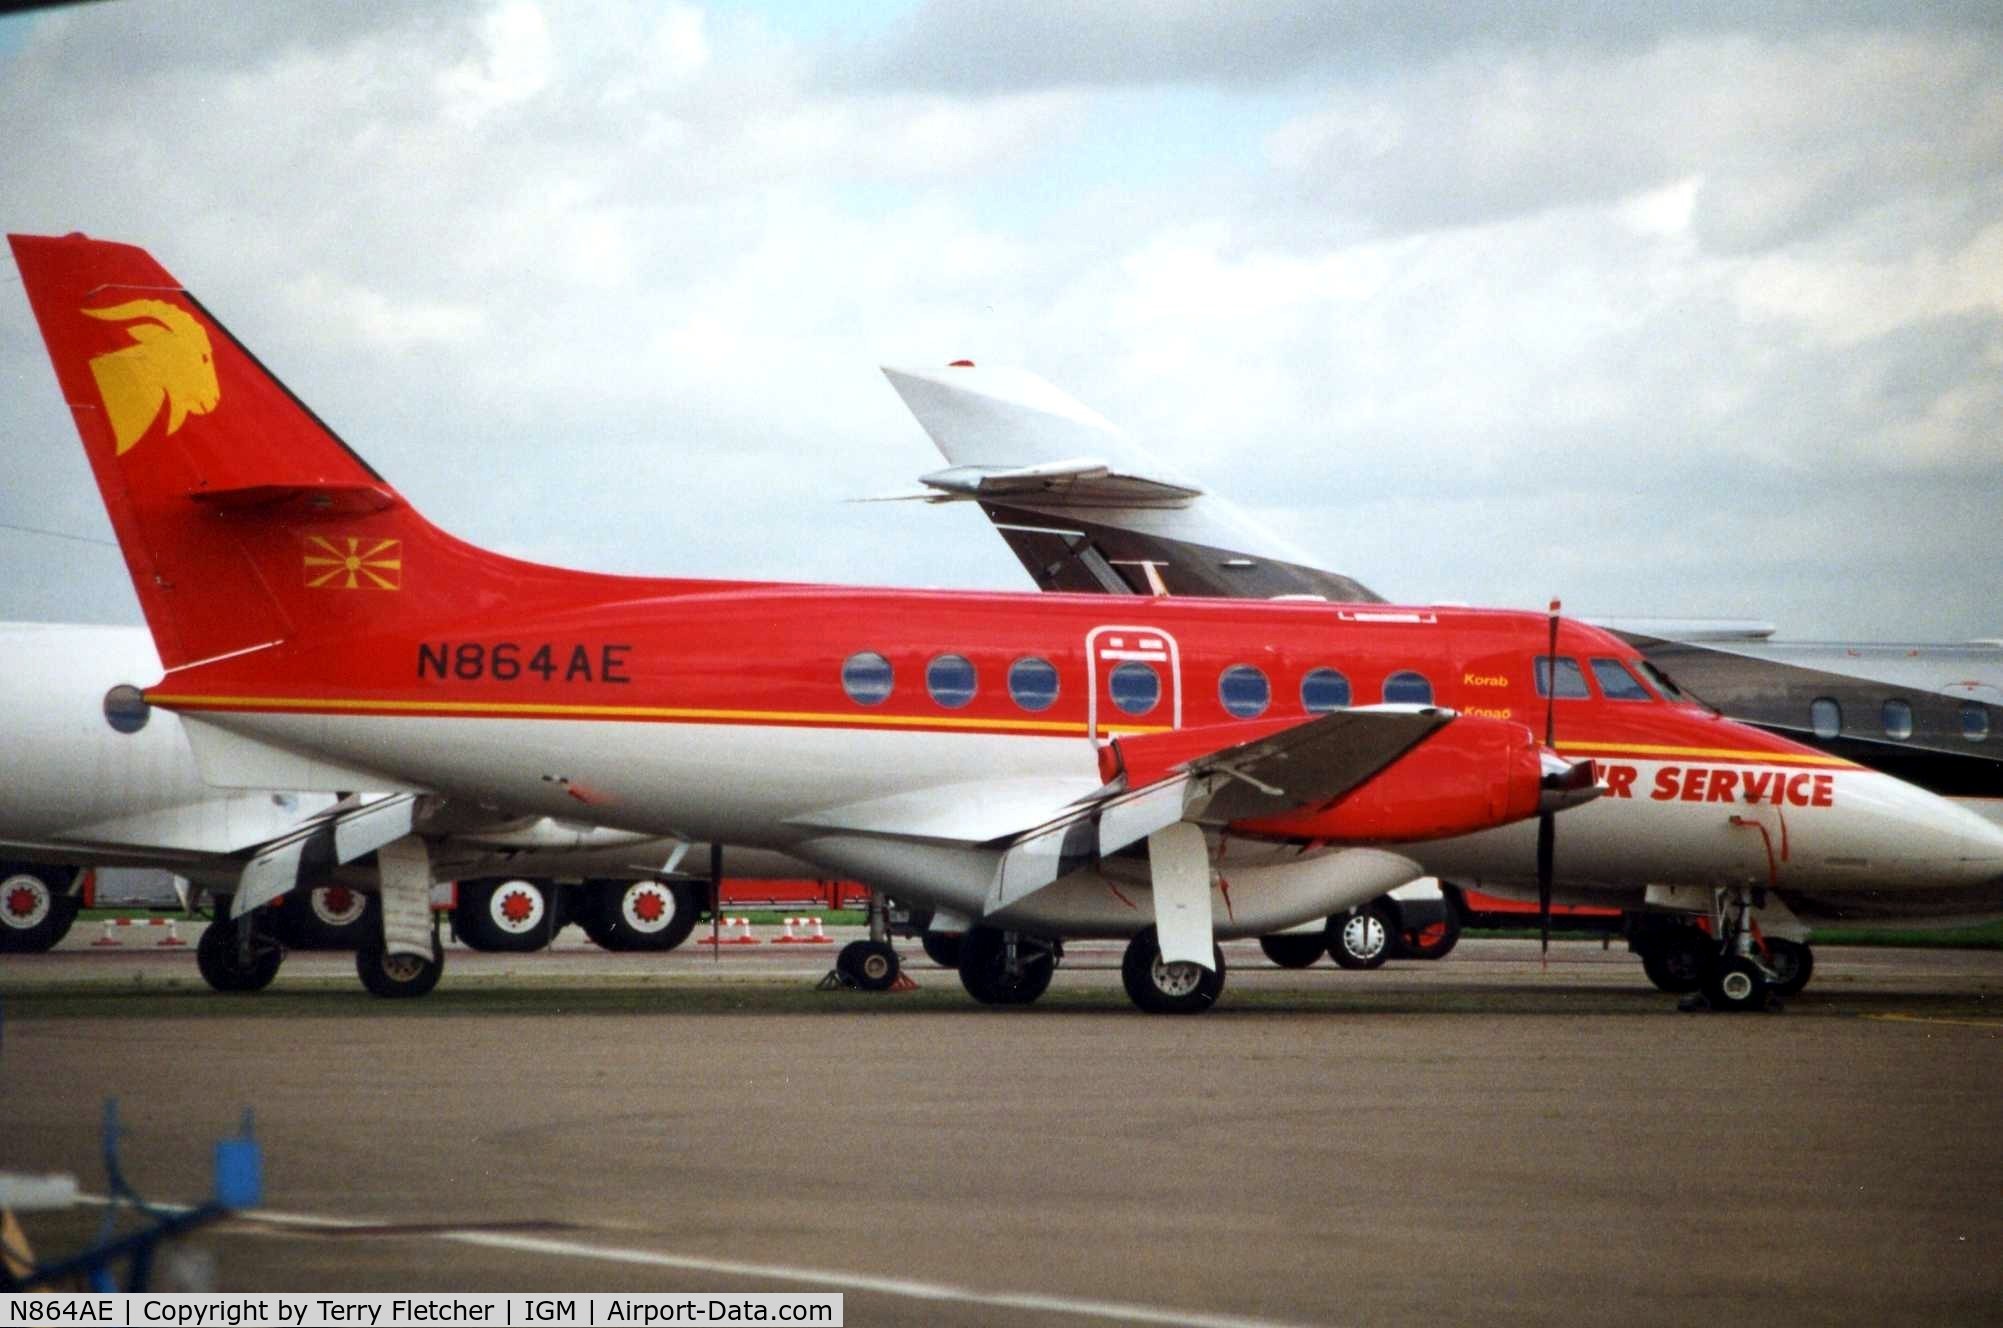 N864AE, 1989 British Aerospace BAe-3201 Jetstream C/N 864, pictured here in the colours of Air Services Macedonia  it briefly operated on lease as Z3-ASA - it subsequently operated as both SE-LHK and LN-FAN